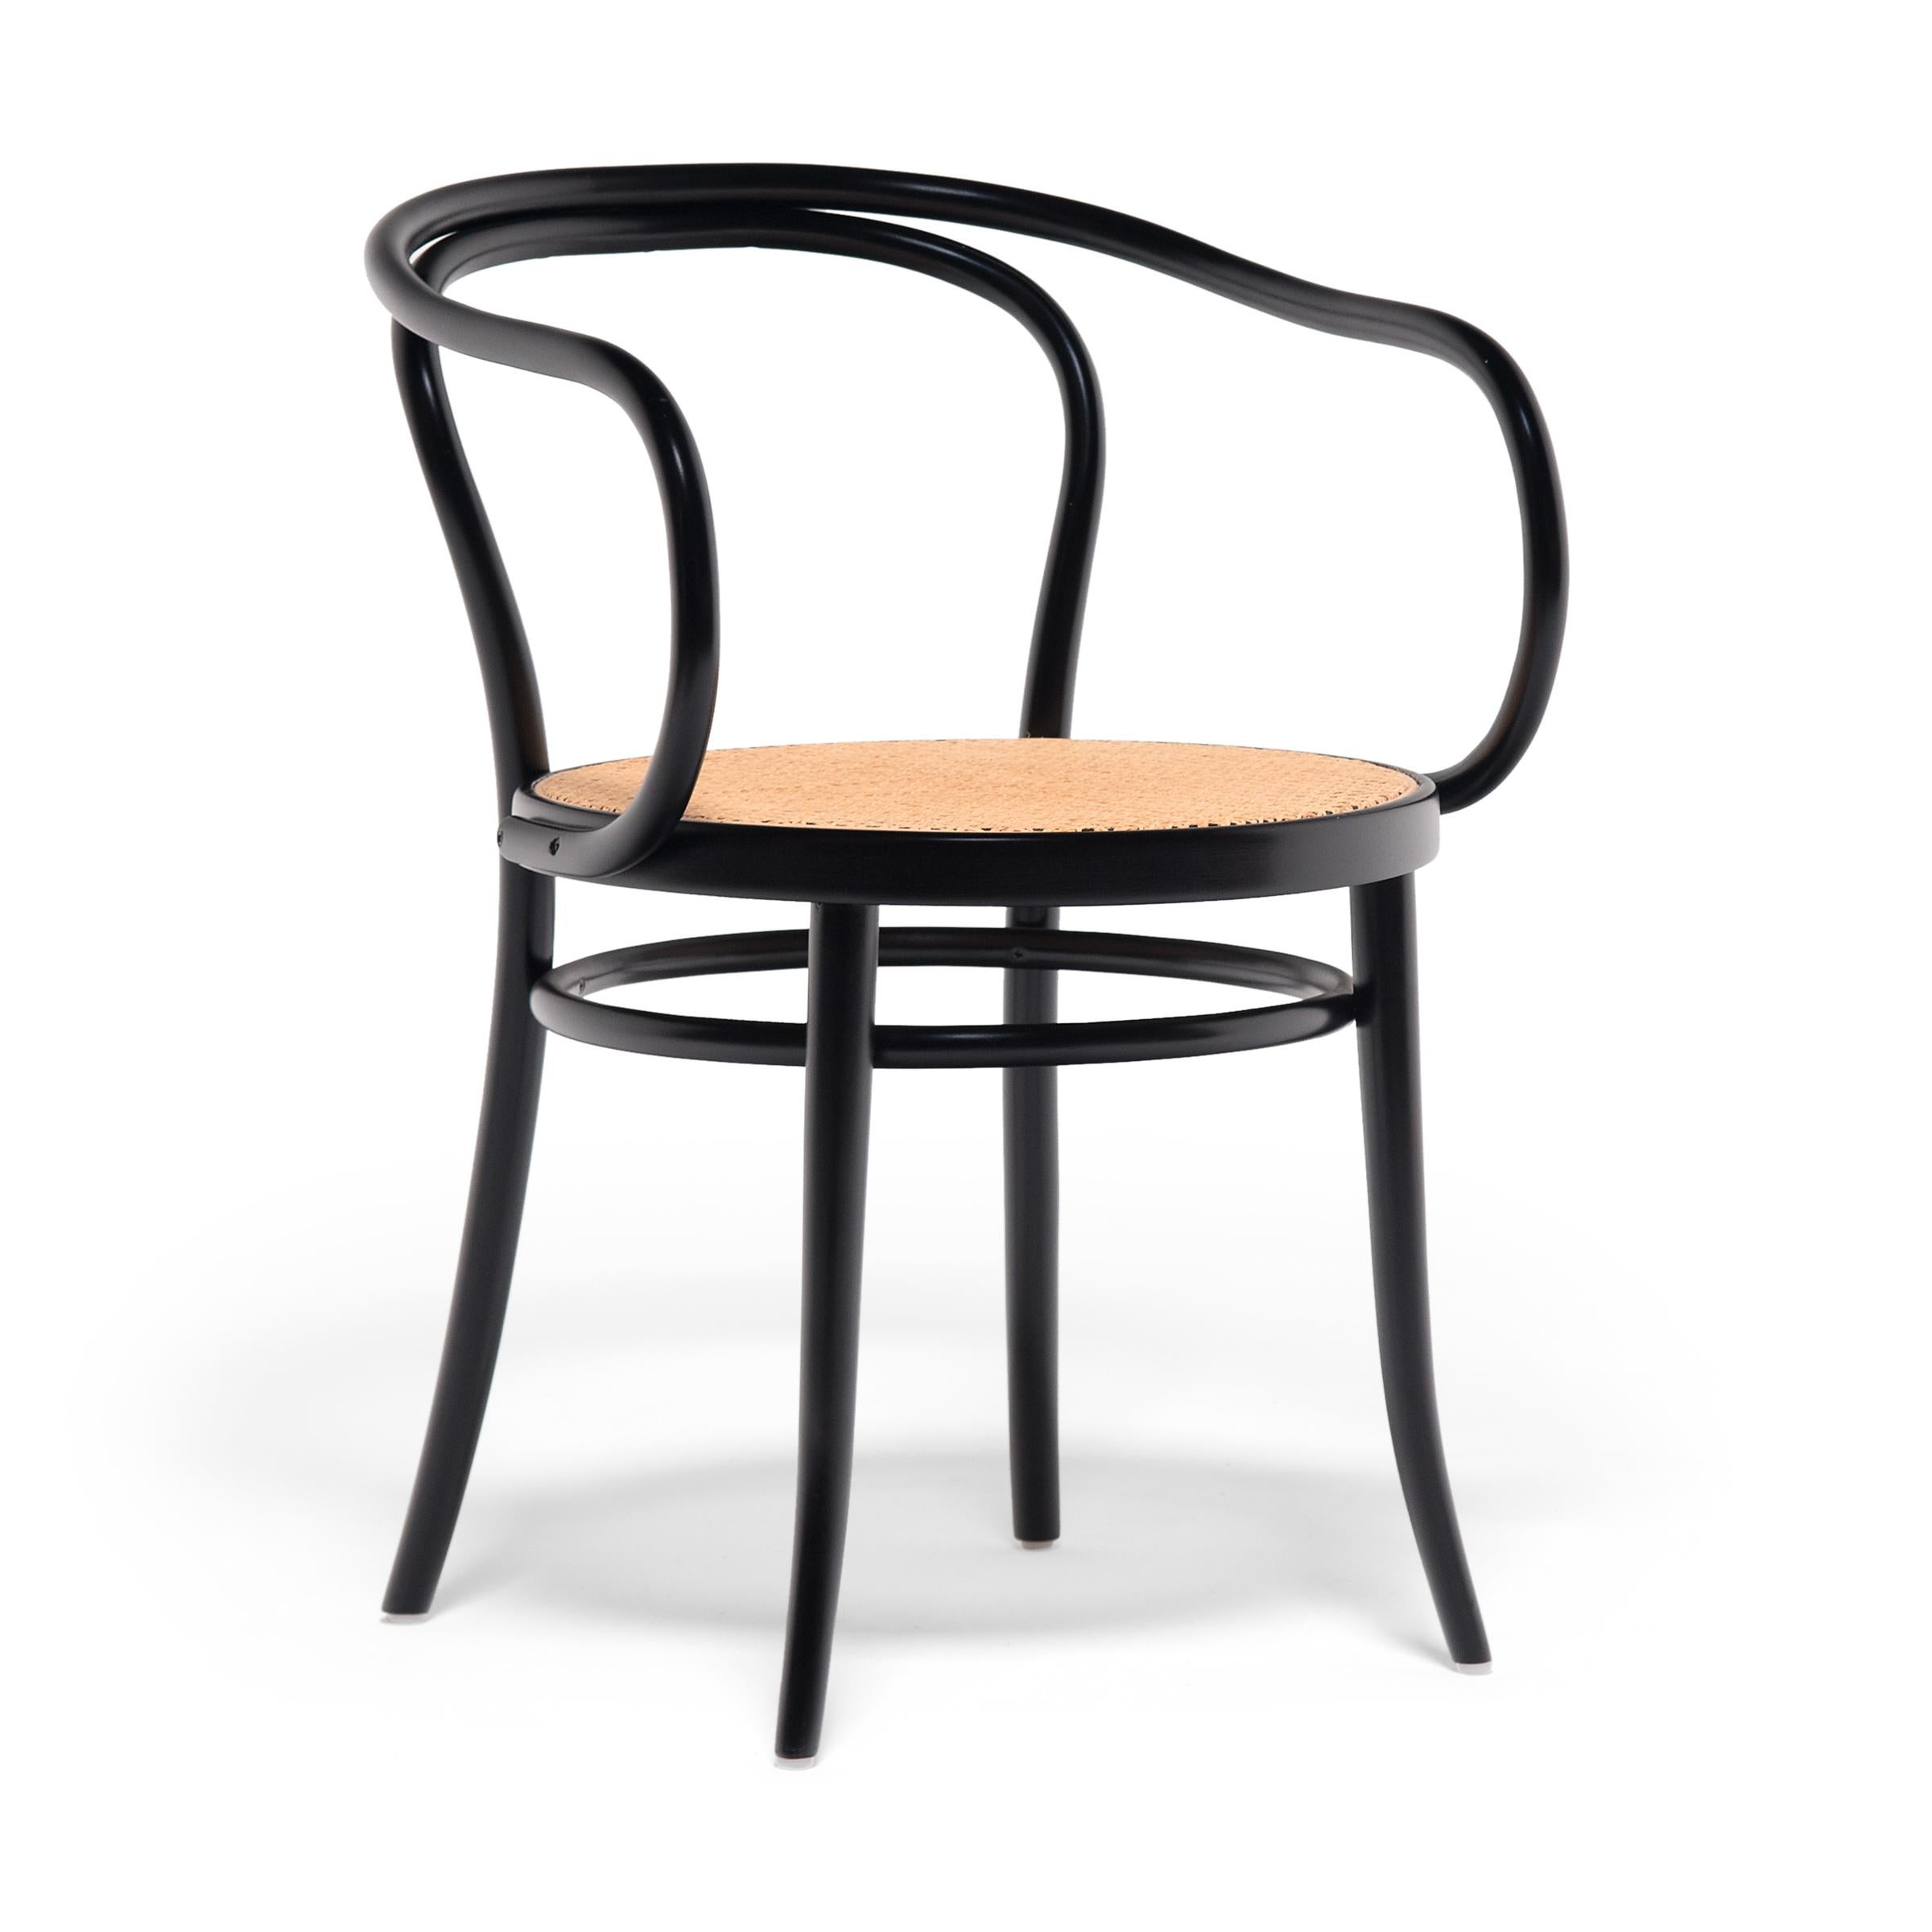 With clean lines and a light, open frame, this Thonet side chair exemplifies the elegance of bentwood furniture. Patented in the mid-19th century by master joiner Michael Thonet, bentwood furniture design is the innovative process of bending